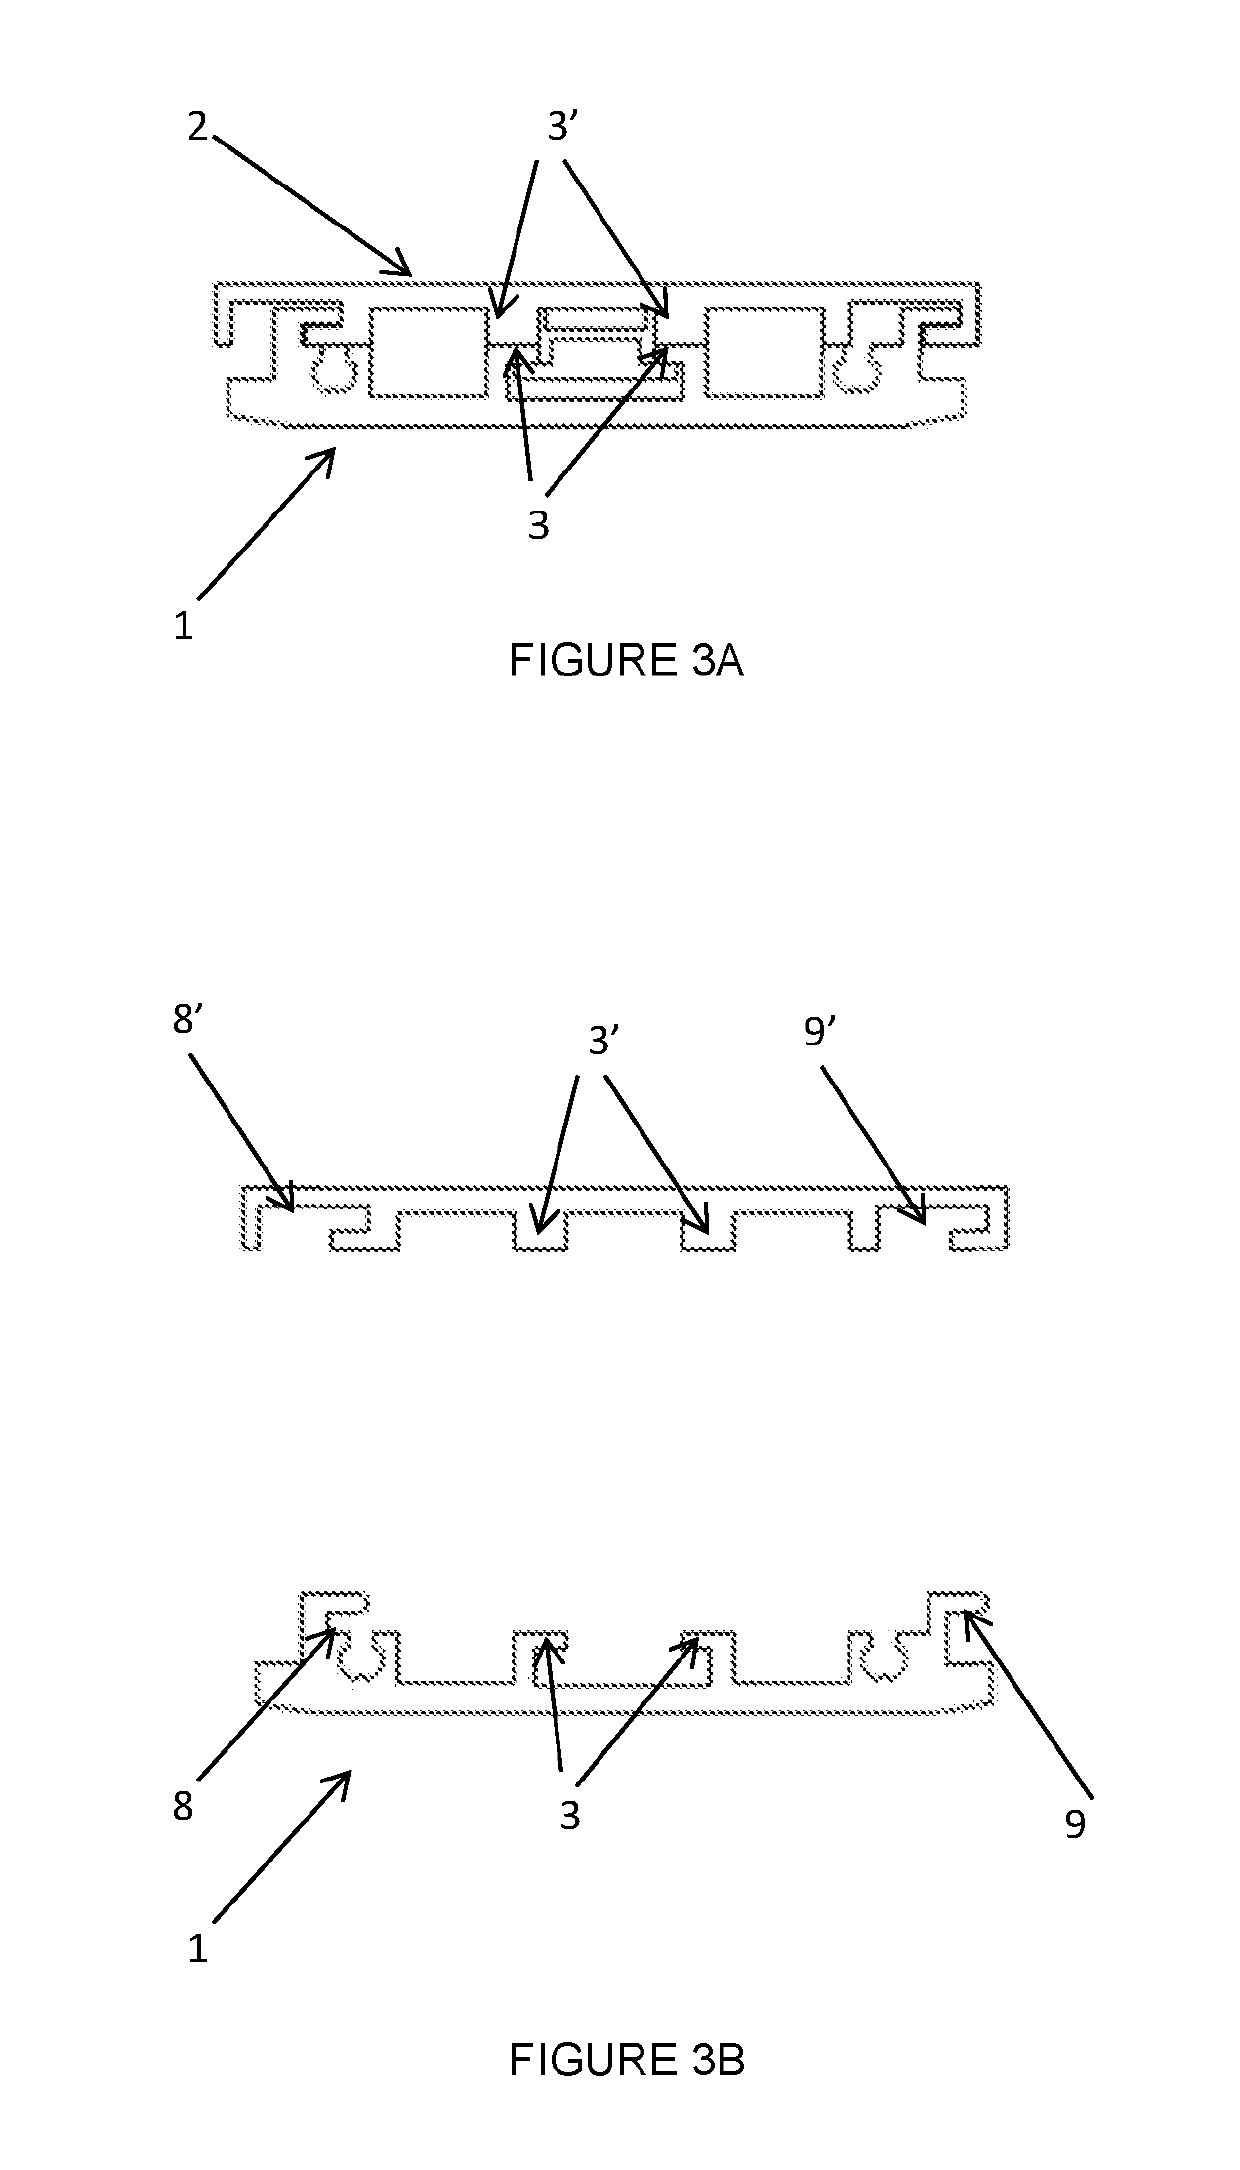 System for securing a sign to a support surface